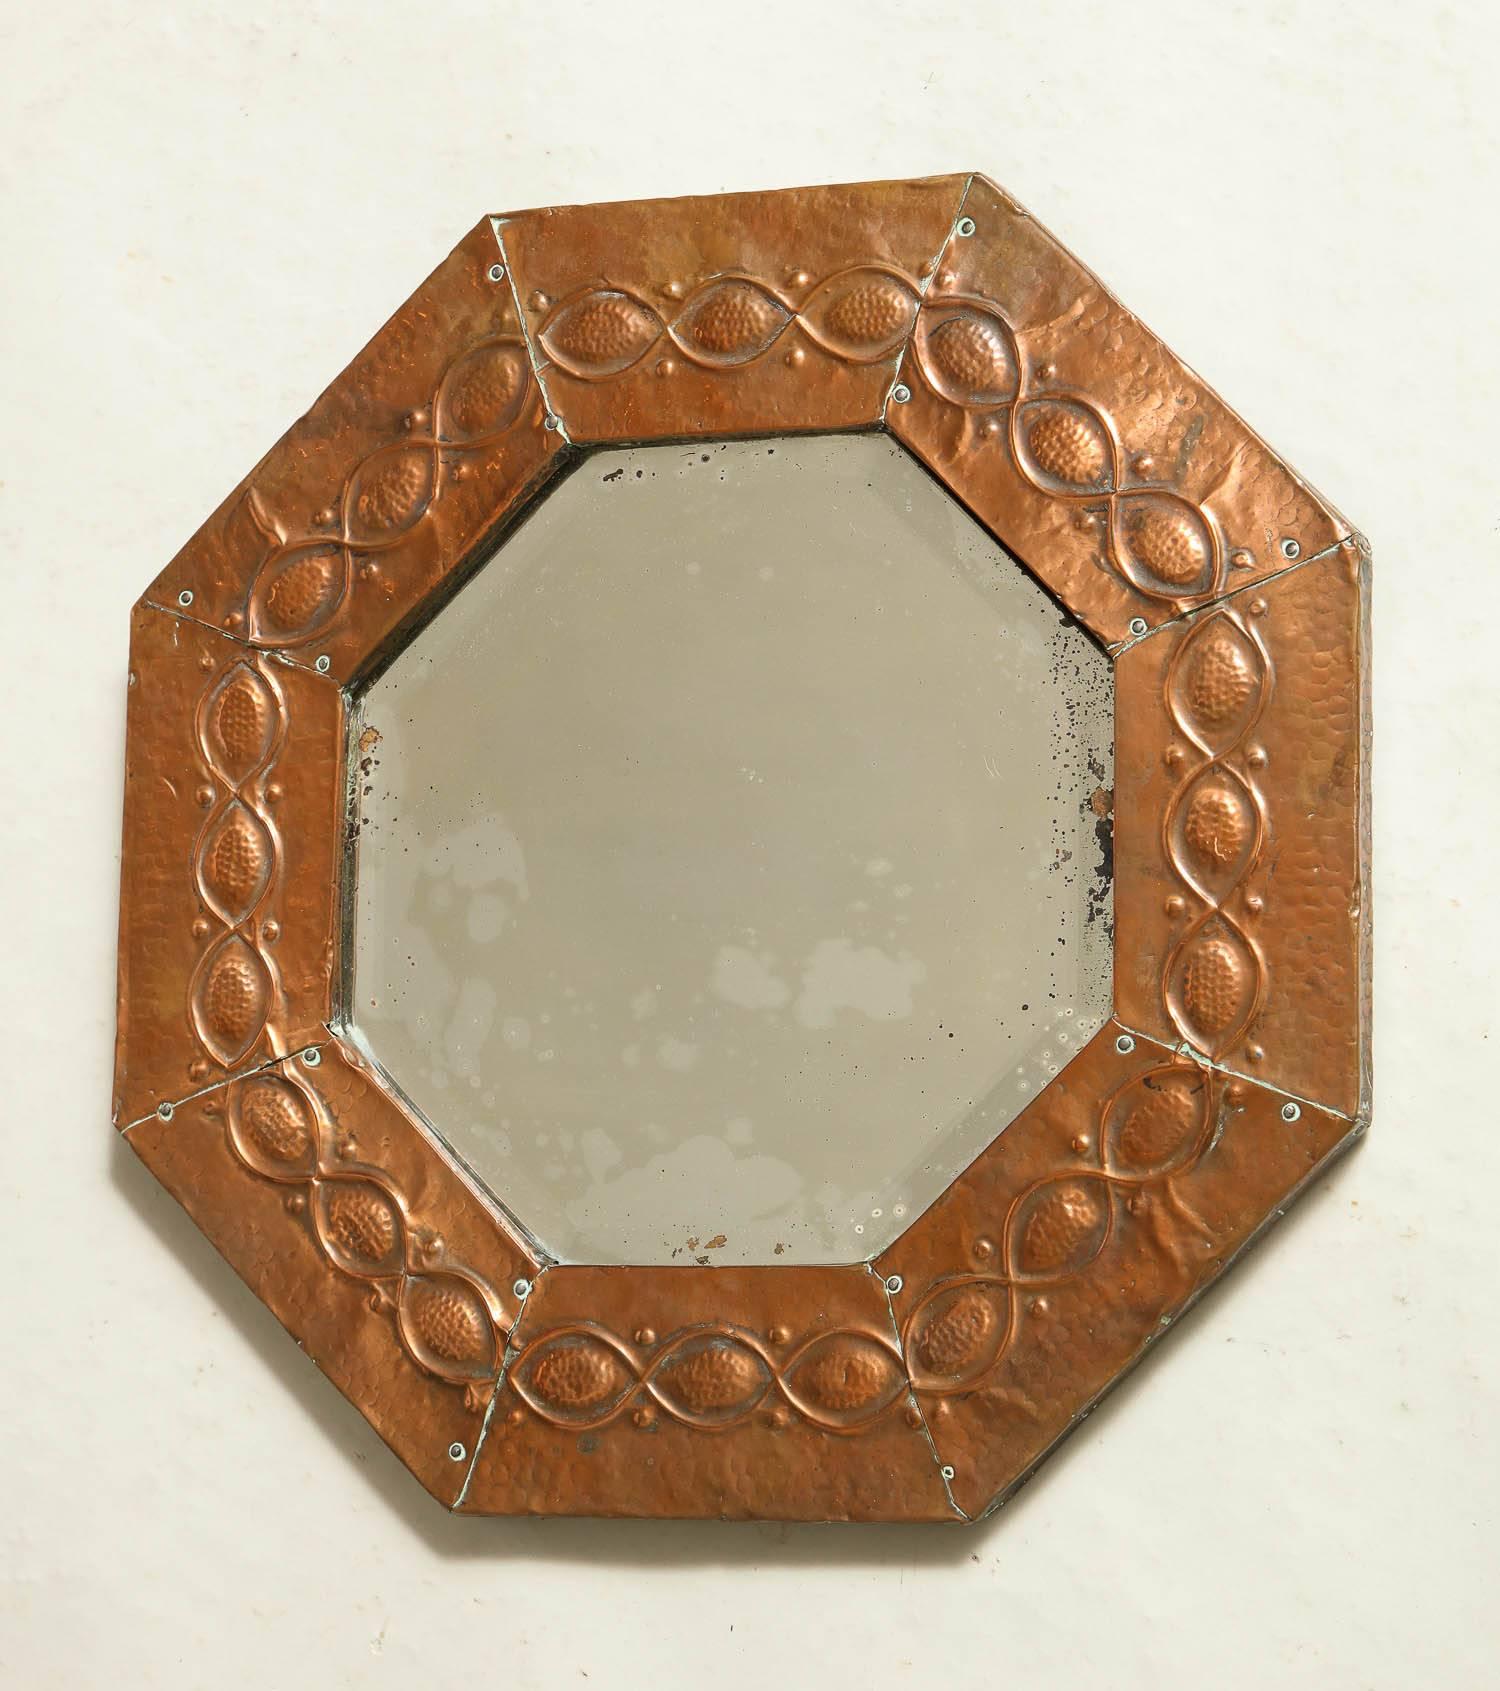 Fine English Arts & Crafts period hammered copper octagonal mirror, the eight panels with Celtic chain decoration and retaining original bevelled glass, circa 1890.